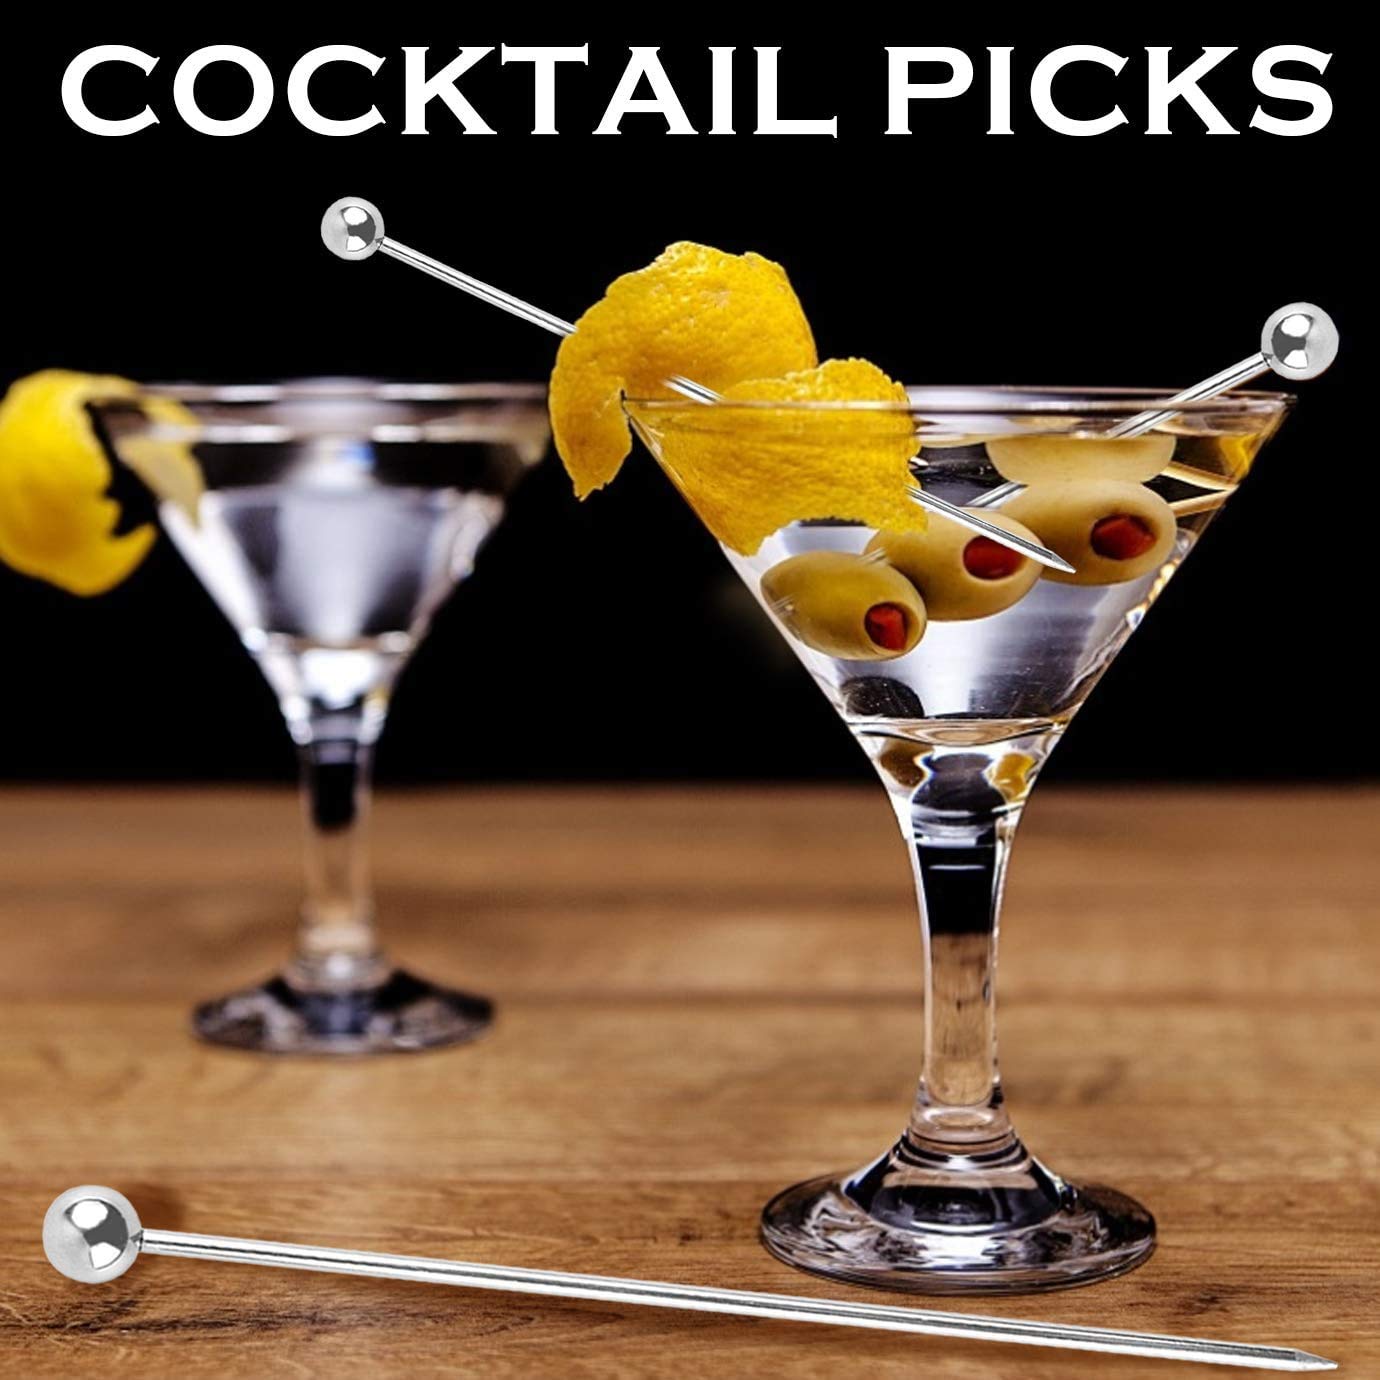 NJ Cocktail Picks 304 Stainless Steel Martini Olive Skewers Reusable Sticks Appetizer Toothpicks Fruit Stick, Perfect for Party Home Bar - 4.3 Inches, 15 Pcs (Small Ball)